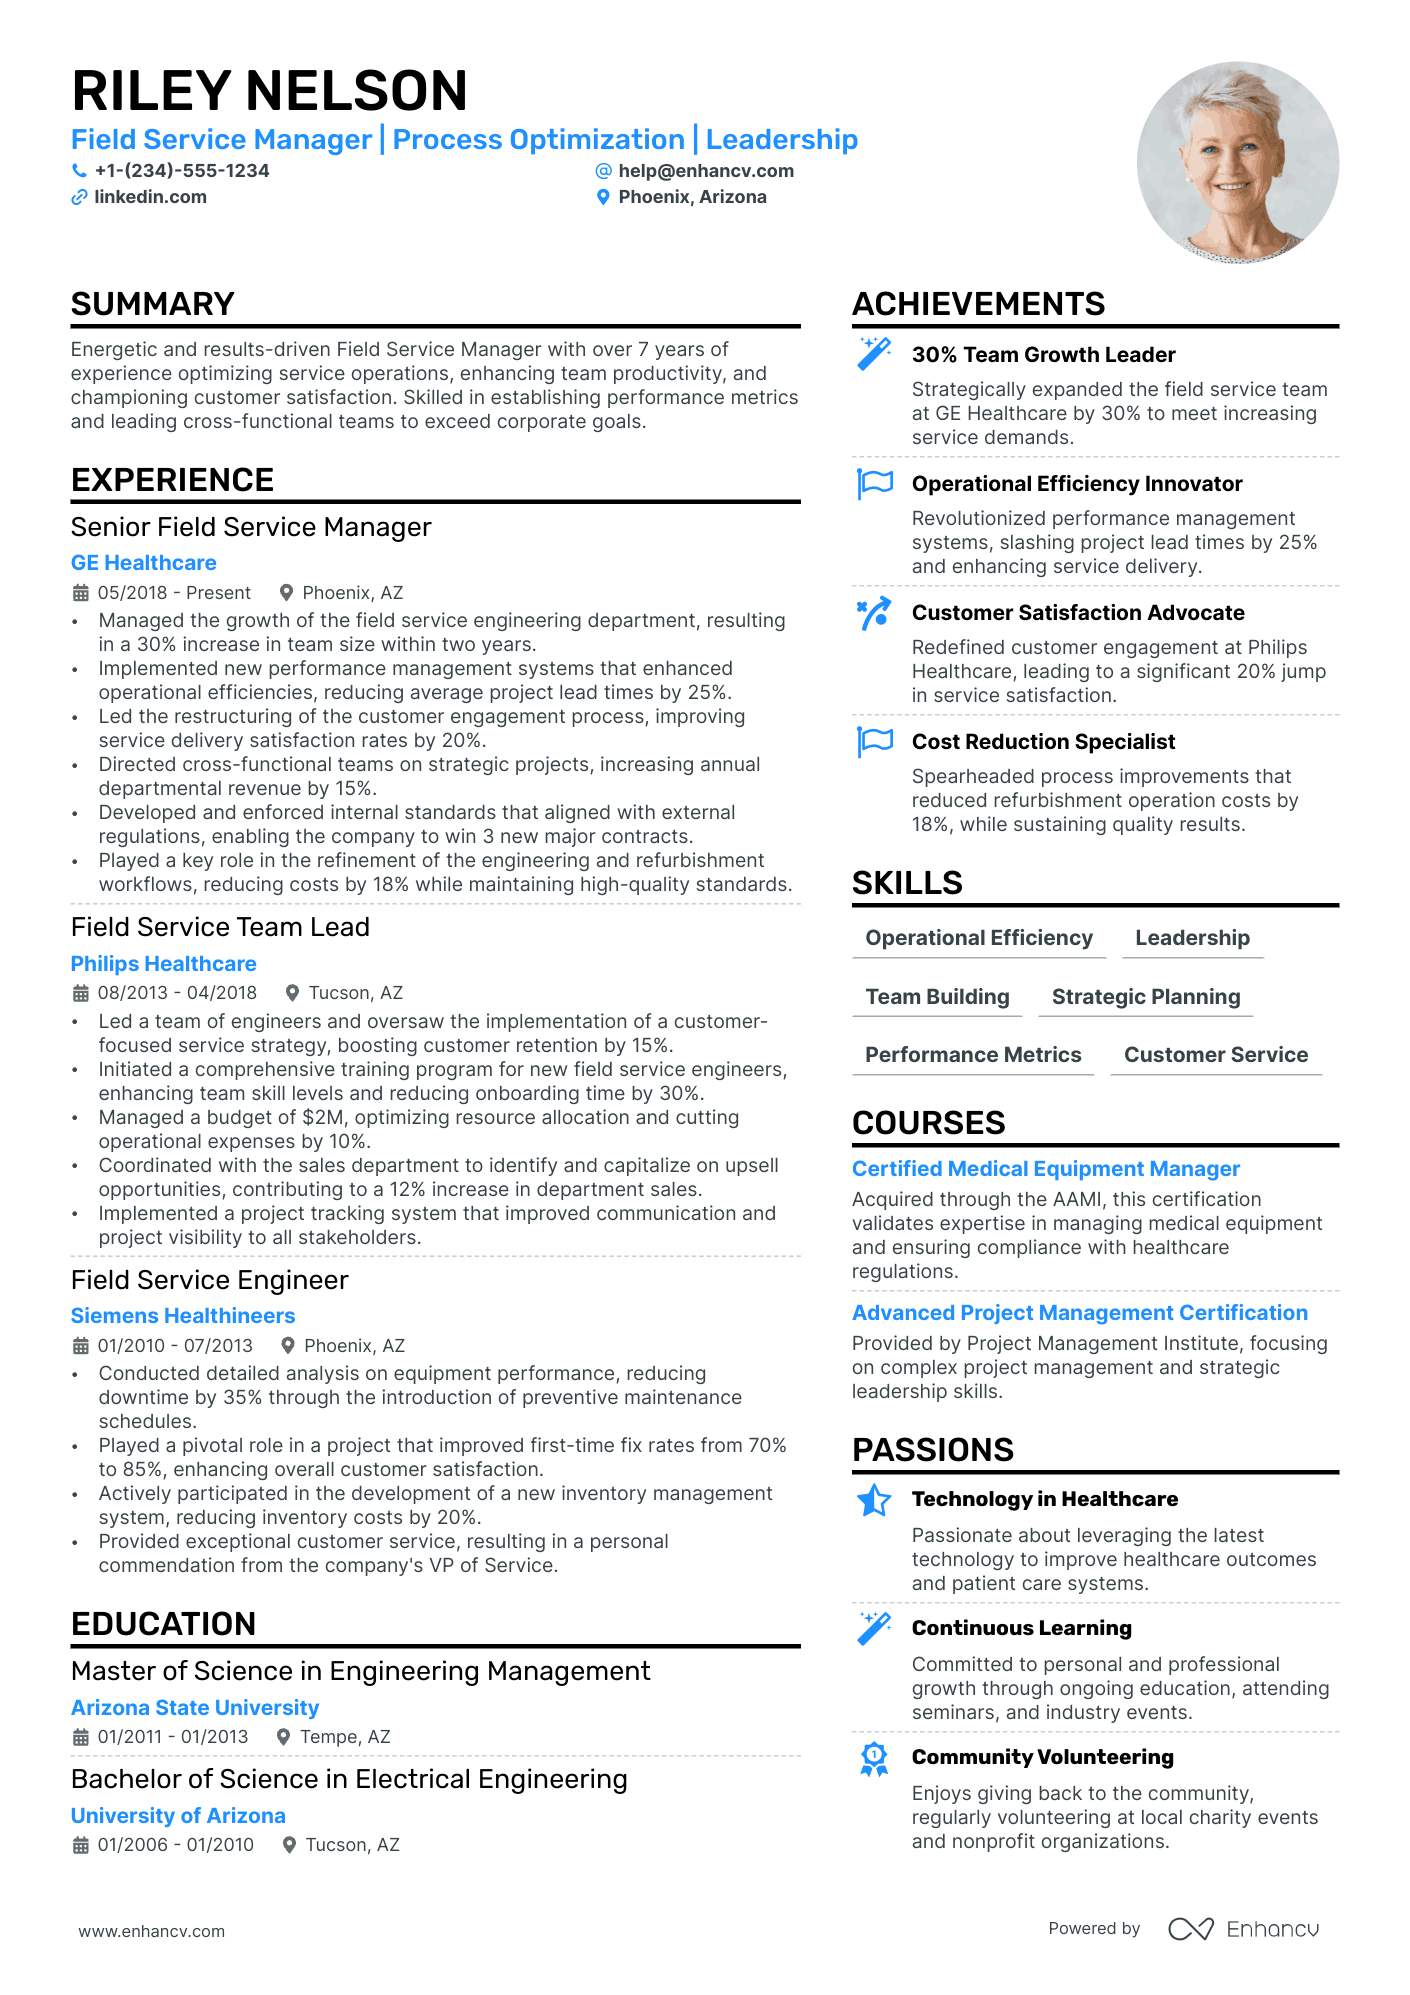 resume experience in customer service